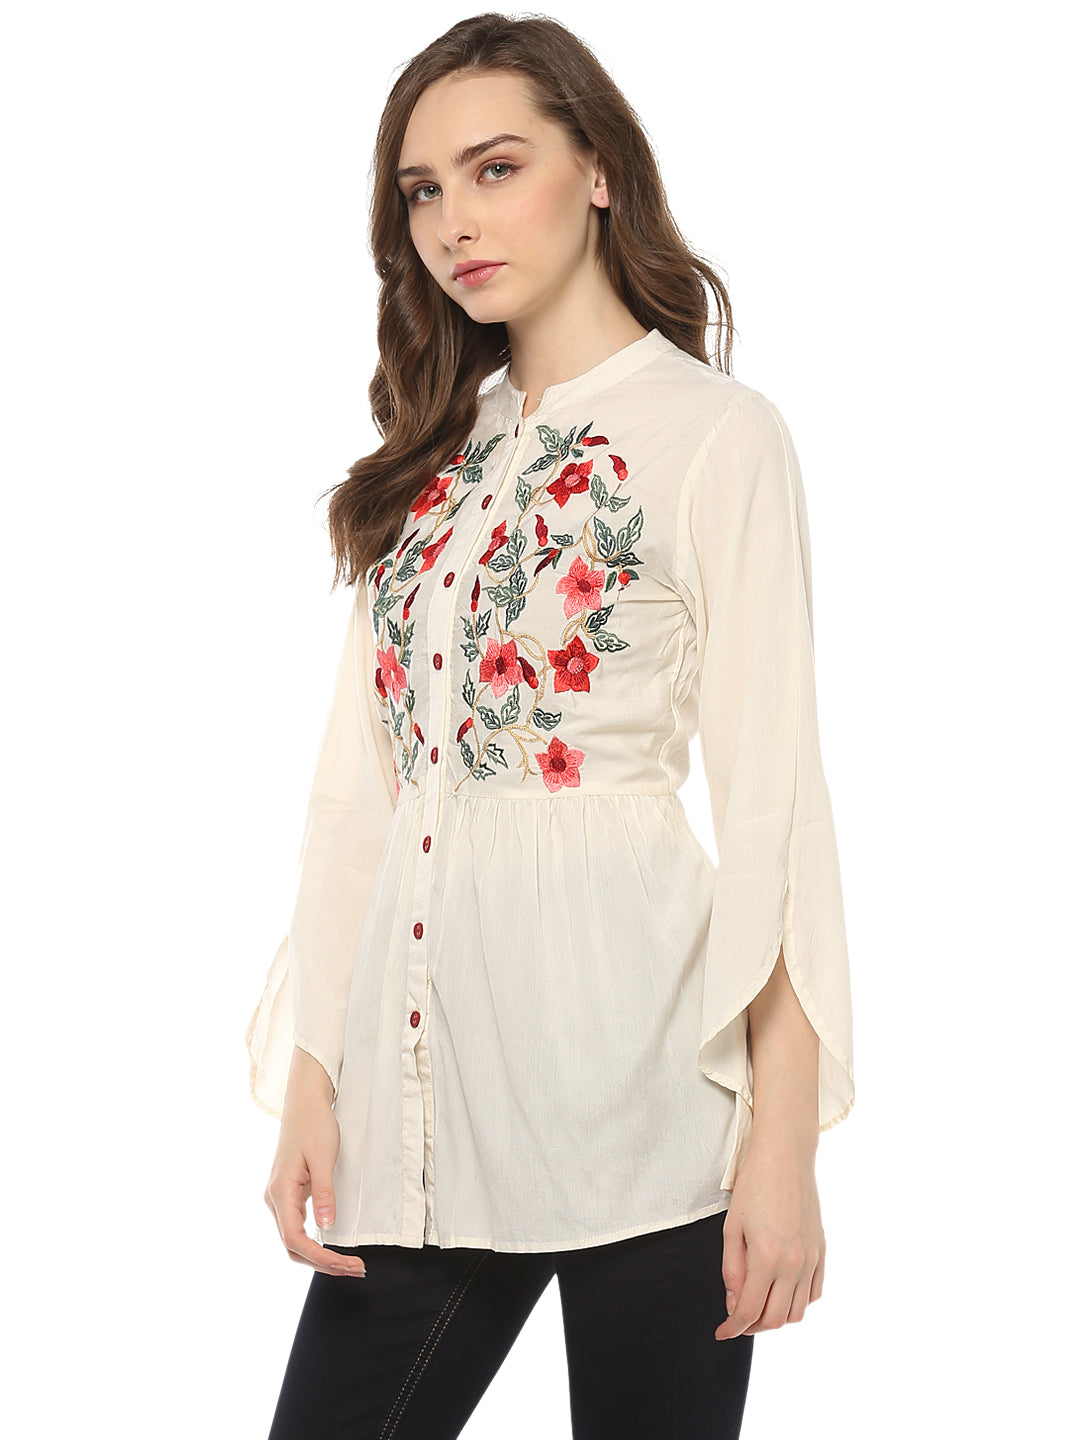 Bhama Couture Off White Embroidered Top